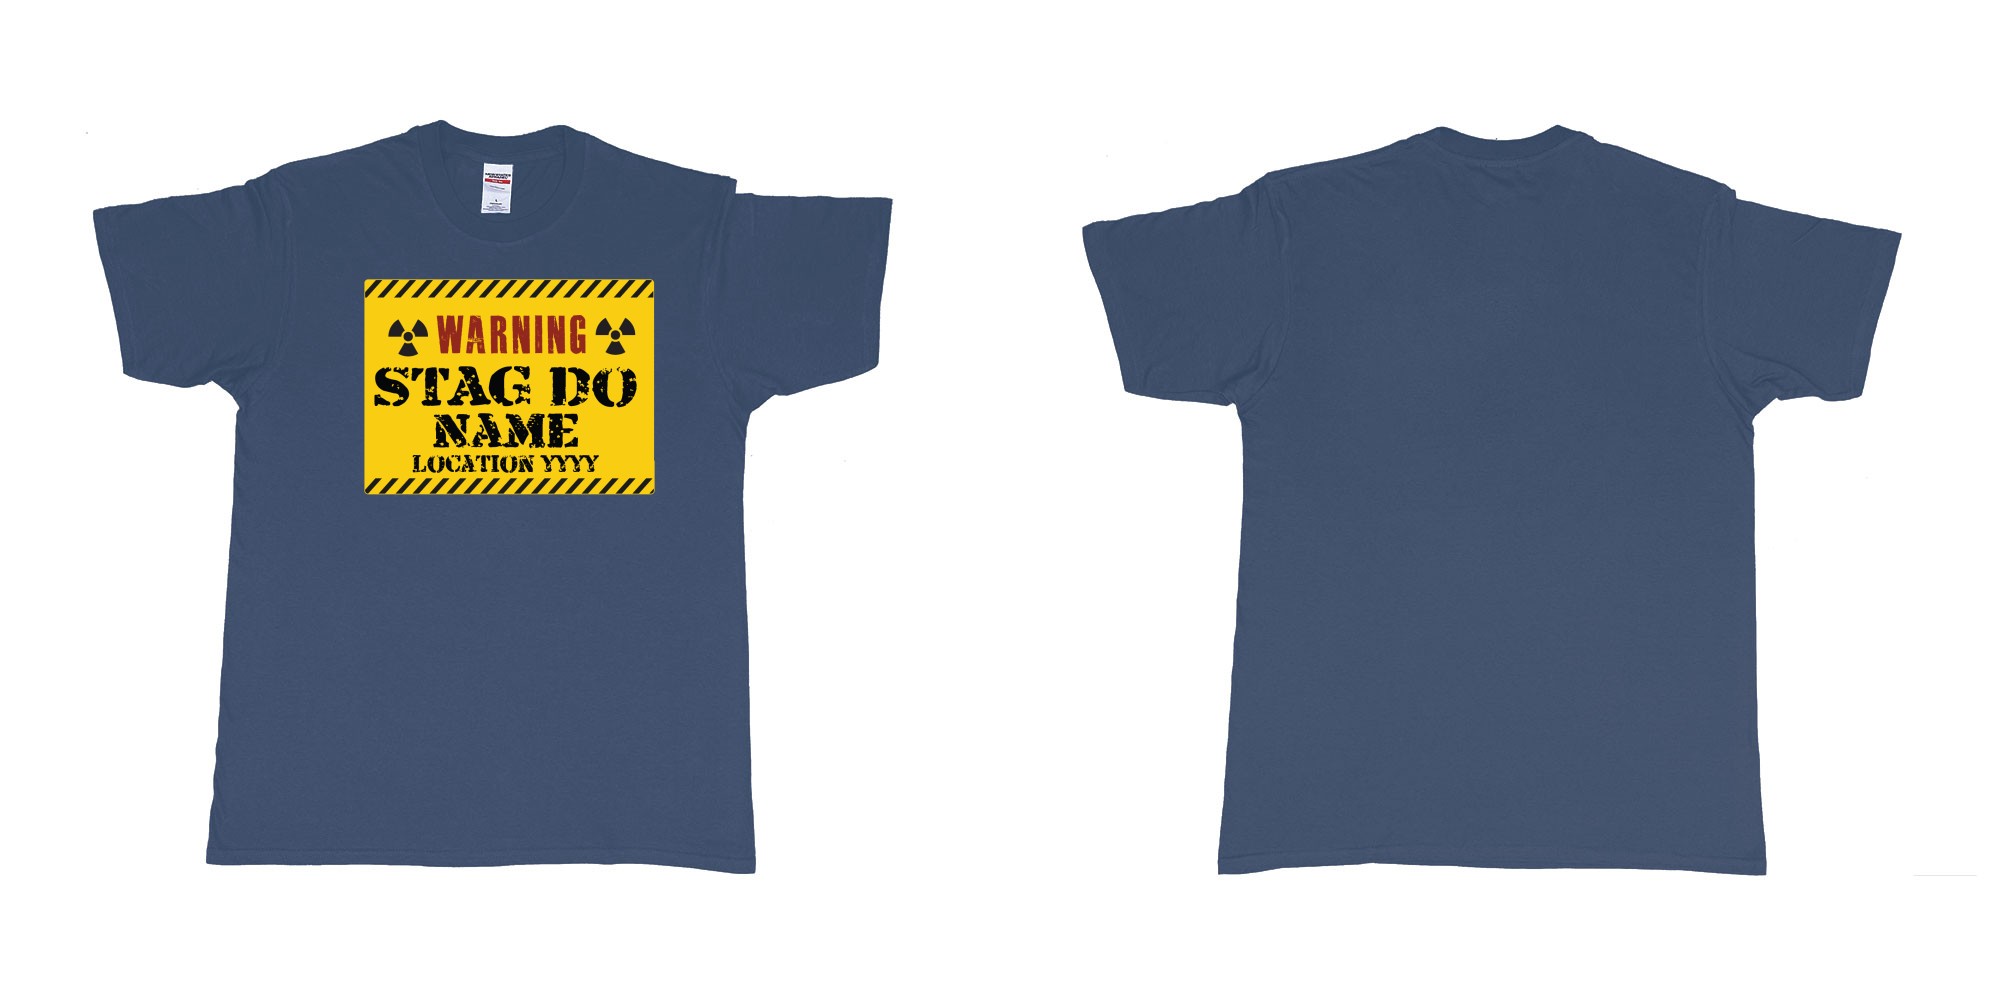 Custom tshirt design Warning Stag Do Location in fabric color navy choice your own text made in Bali by The Pirate Way